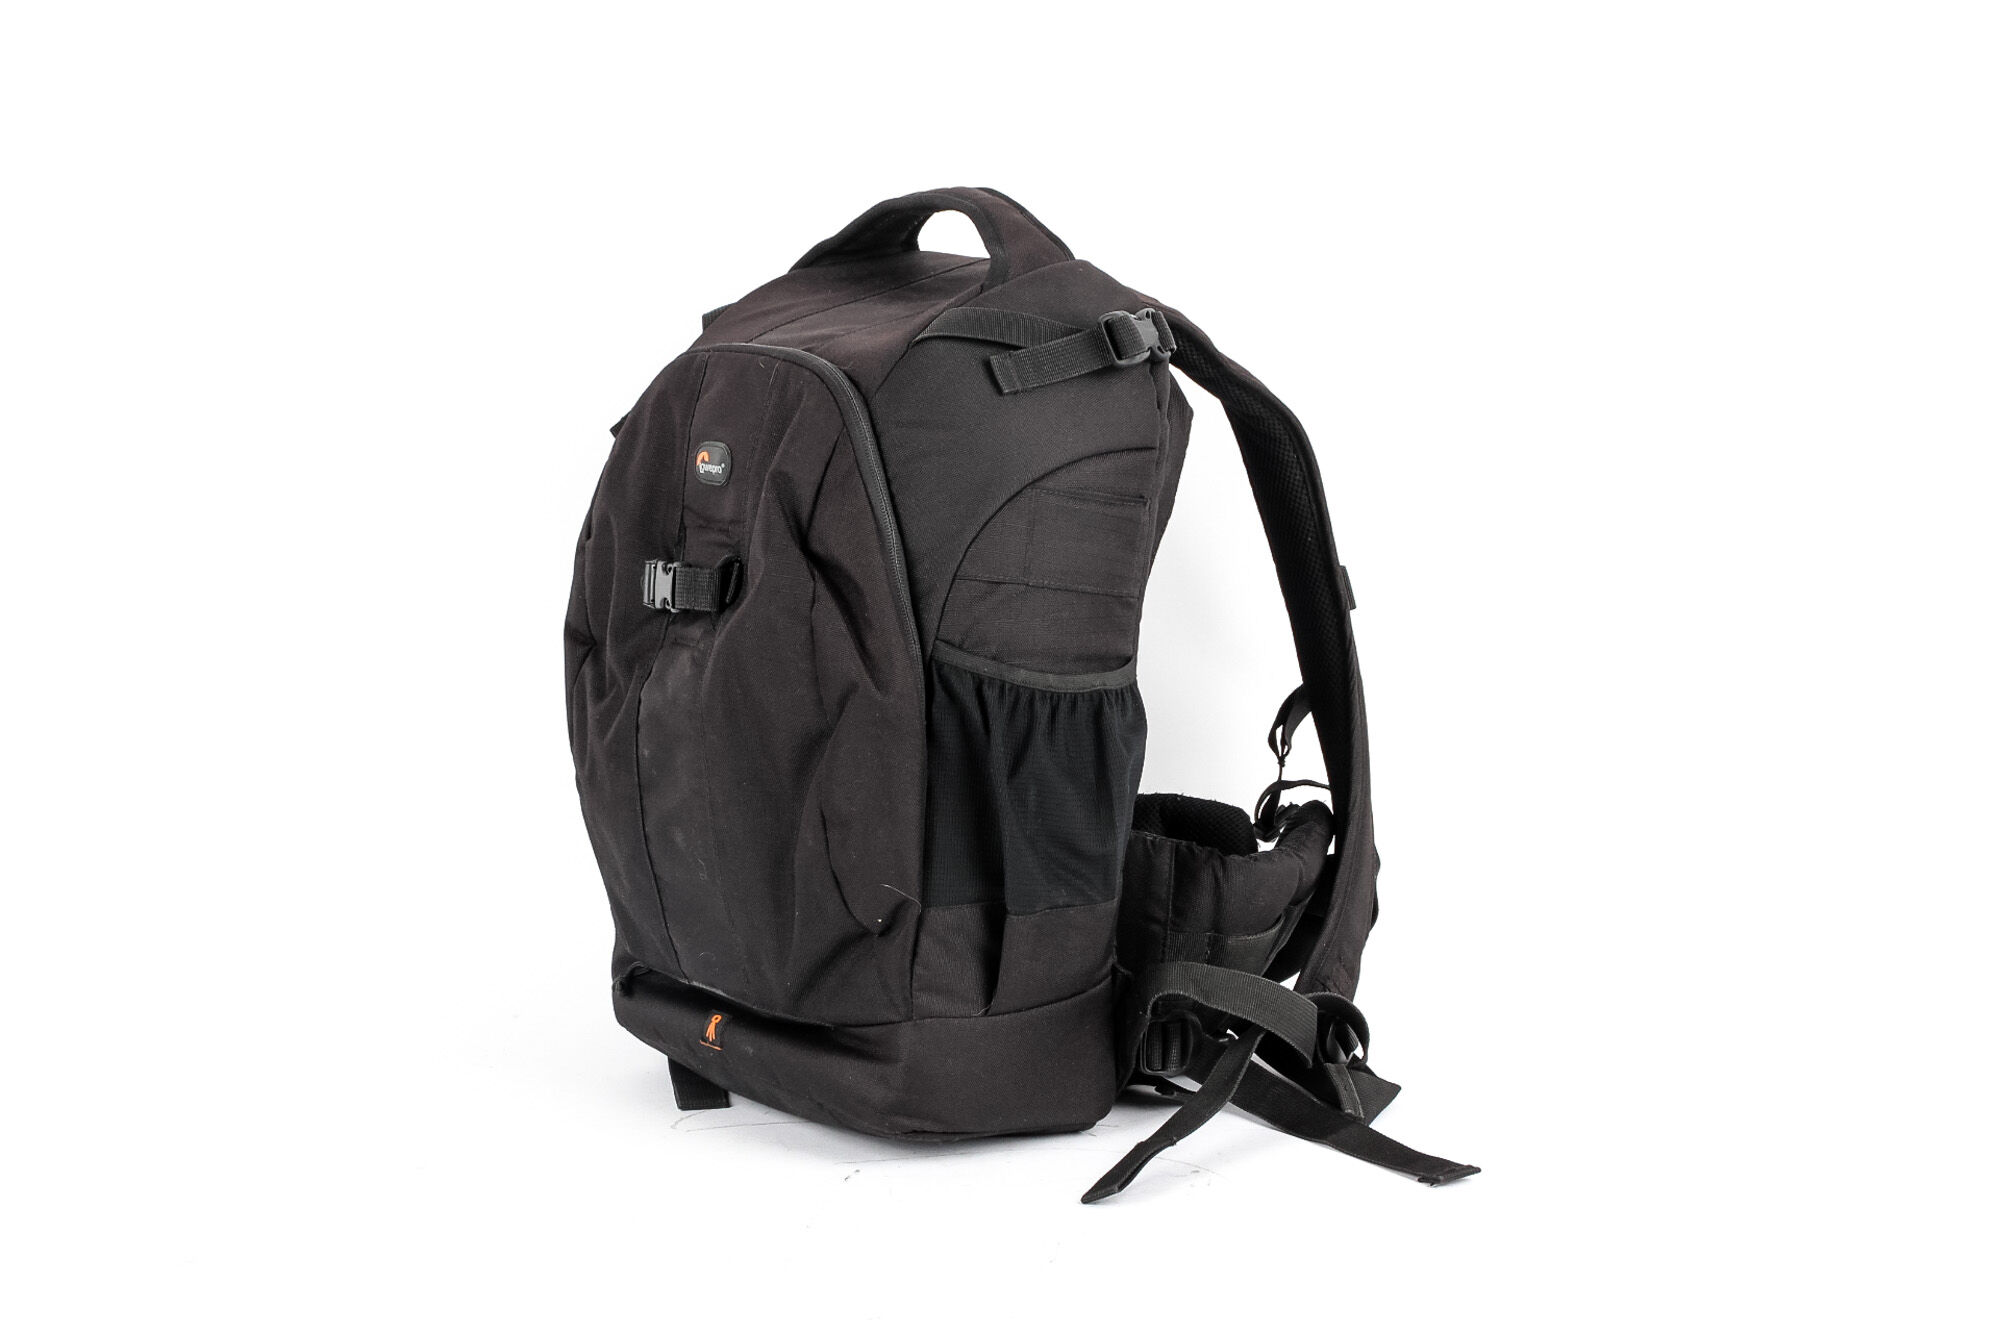 Lowepro Flipside 400 AW Backpack (Condition: Good)